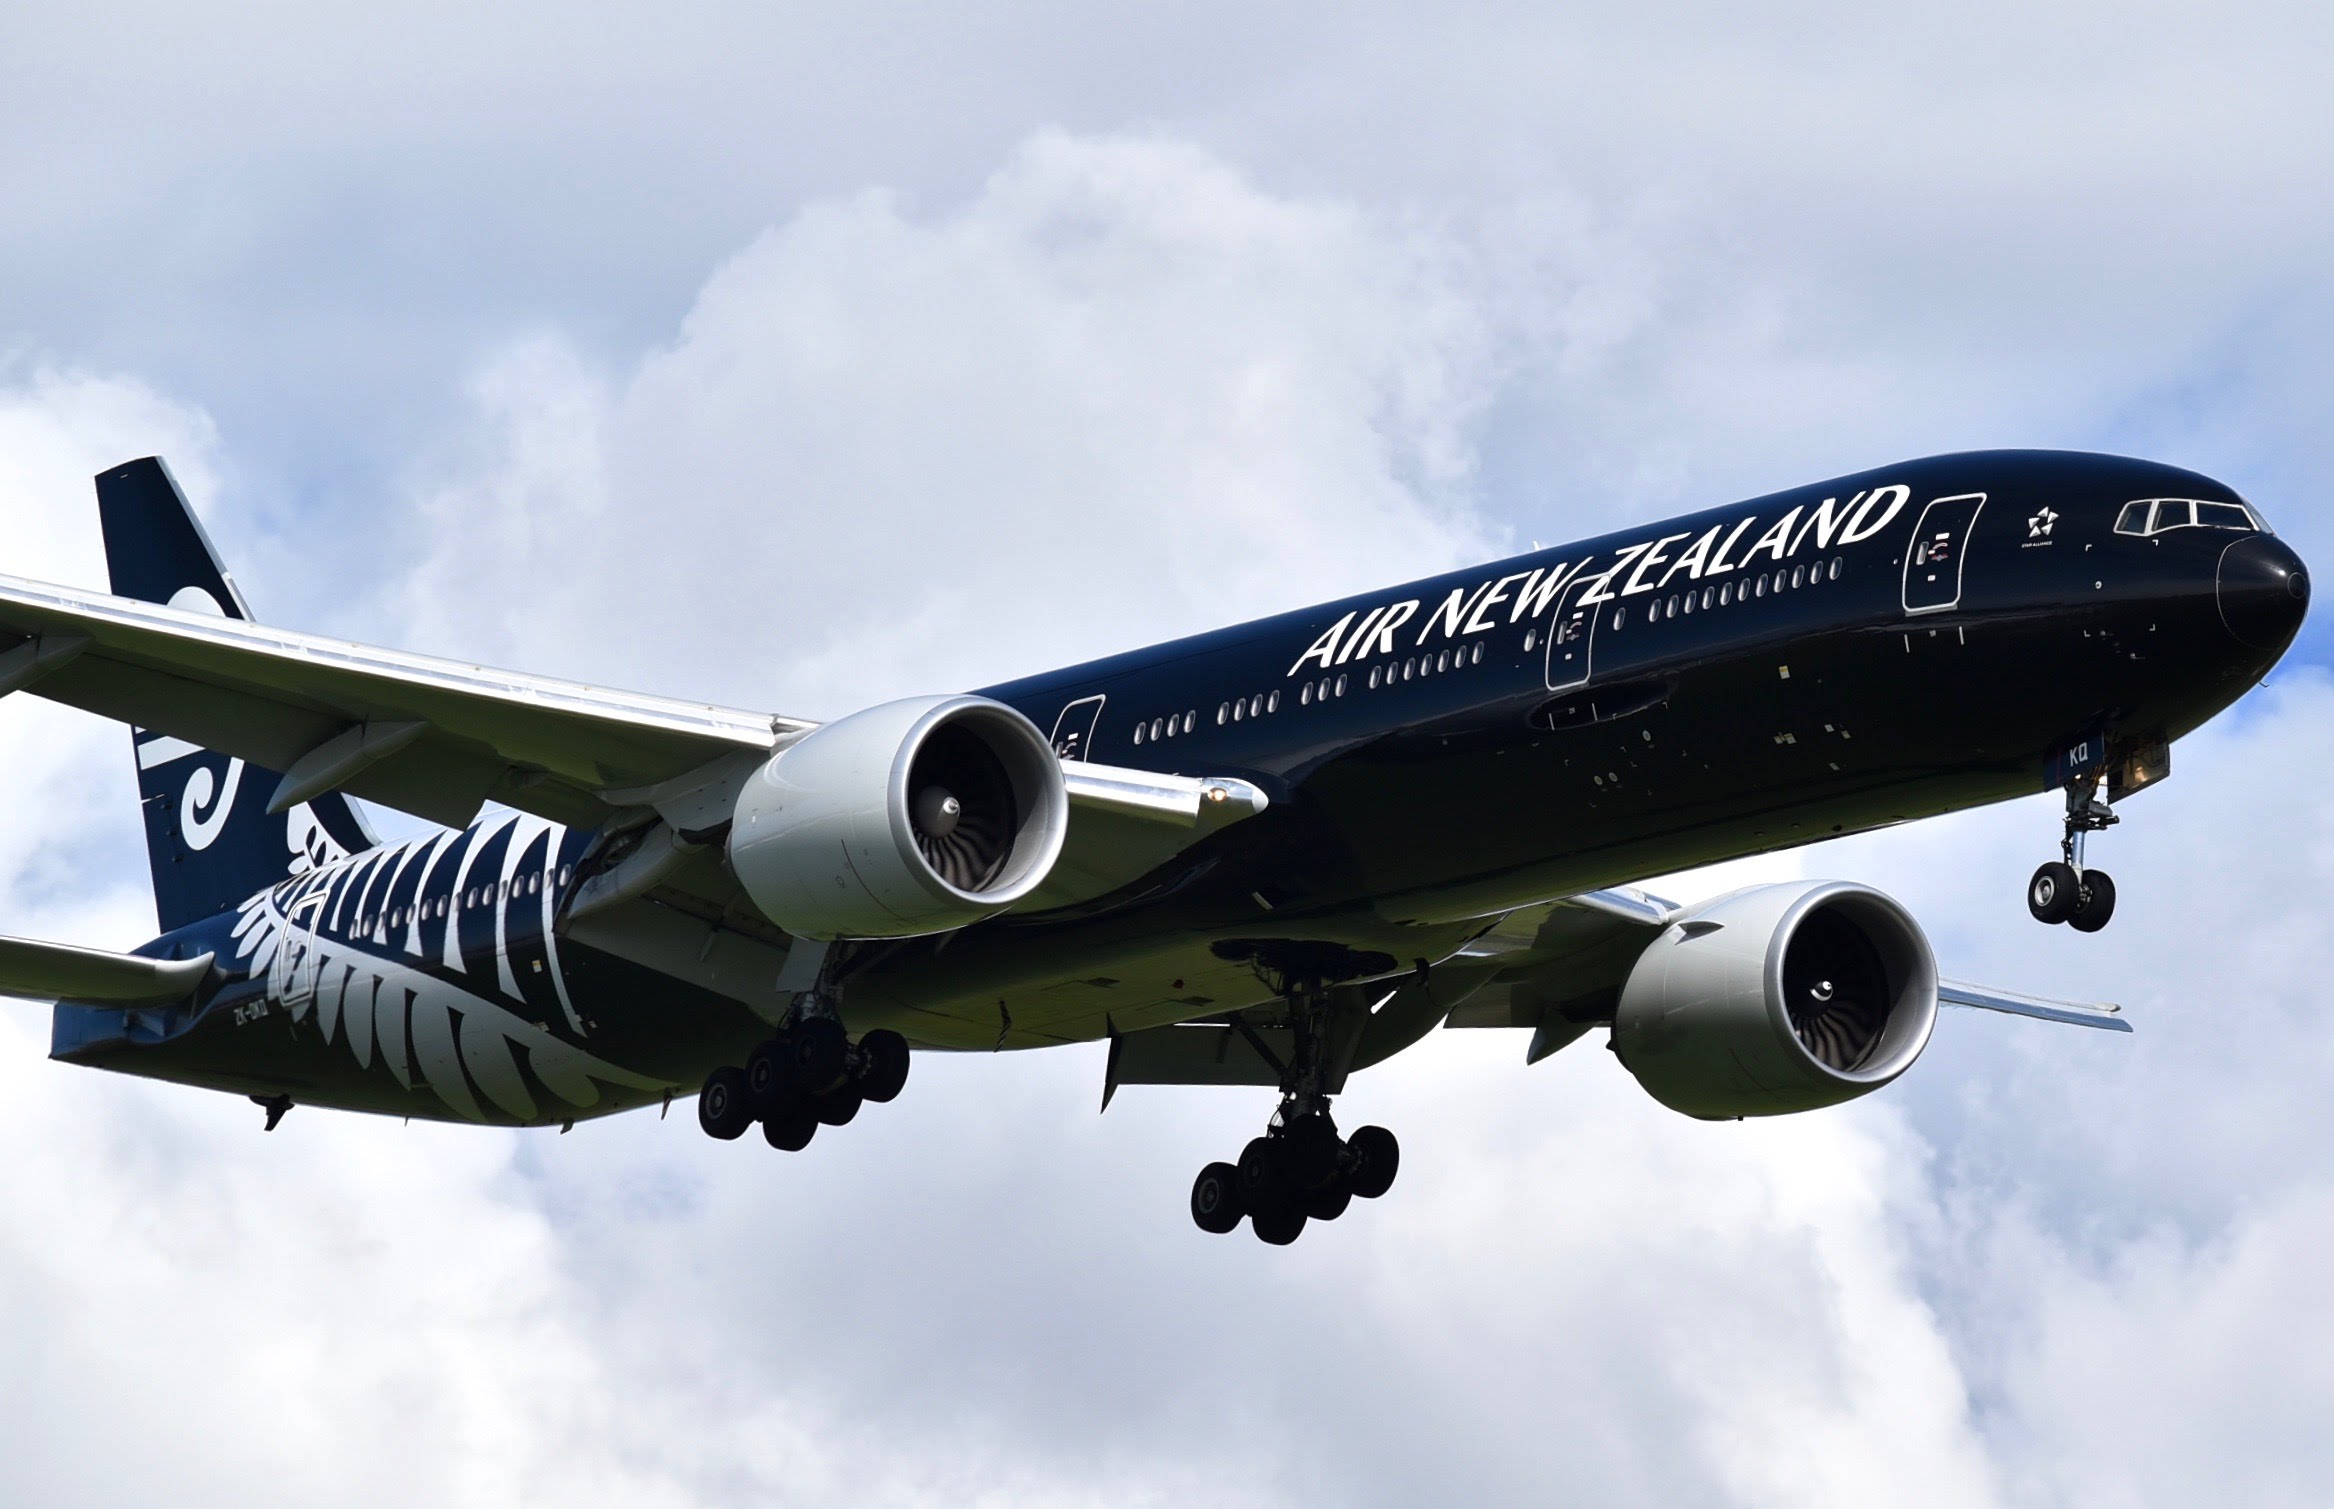 VIDEO Air New Zealand All Black 777 Landing at Melbourne